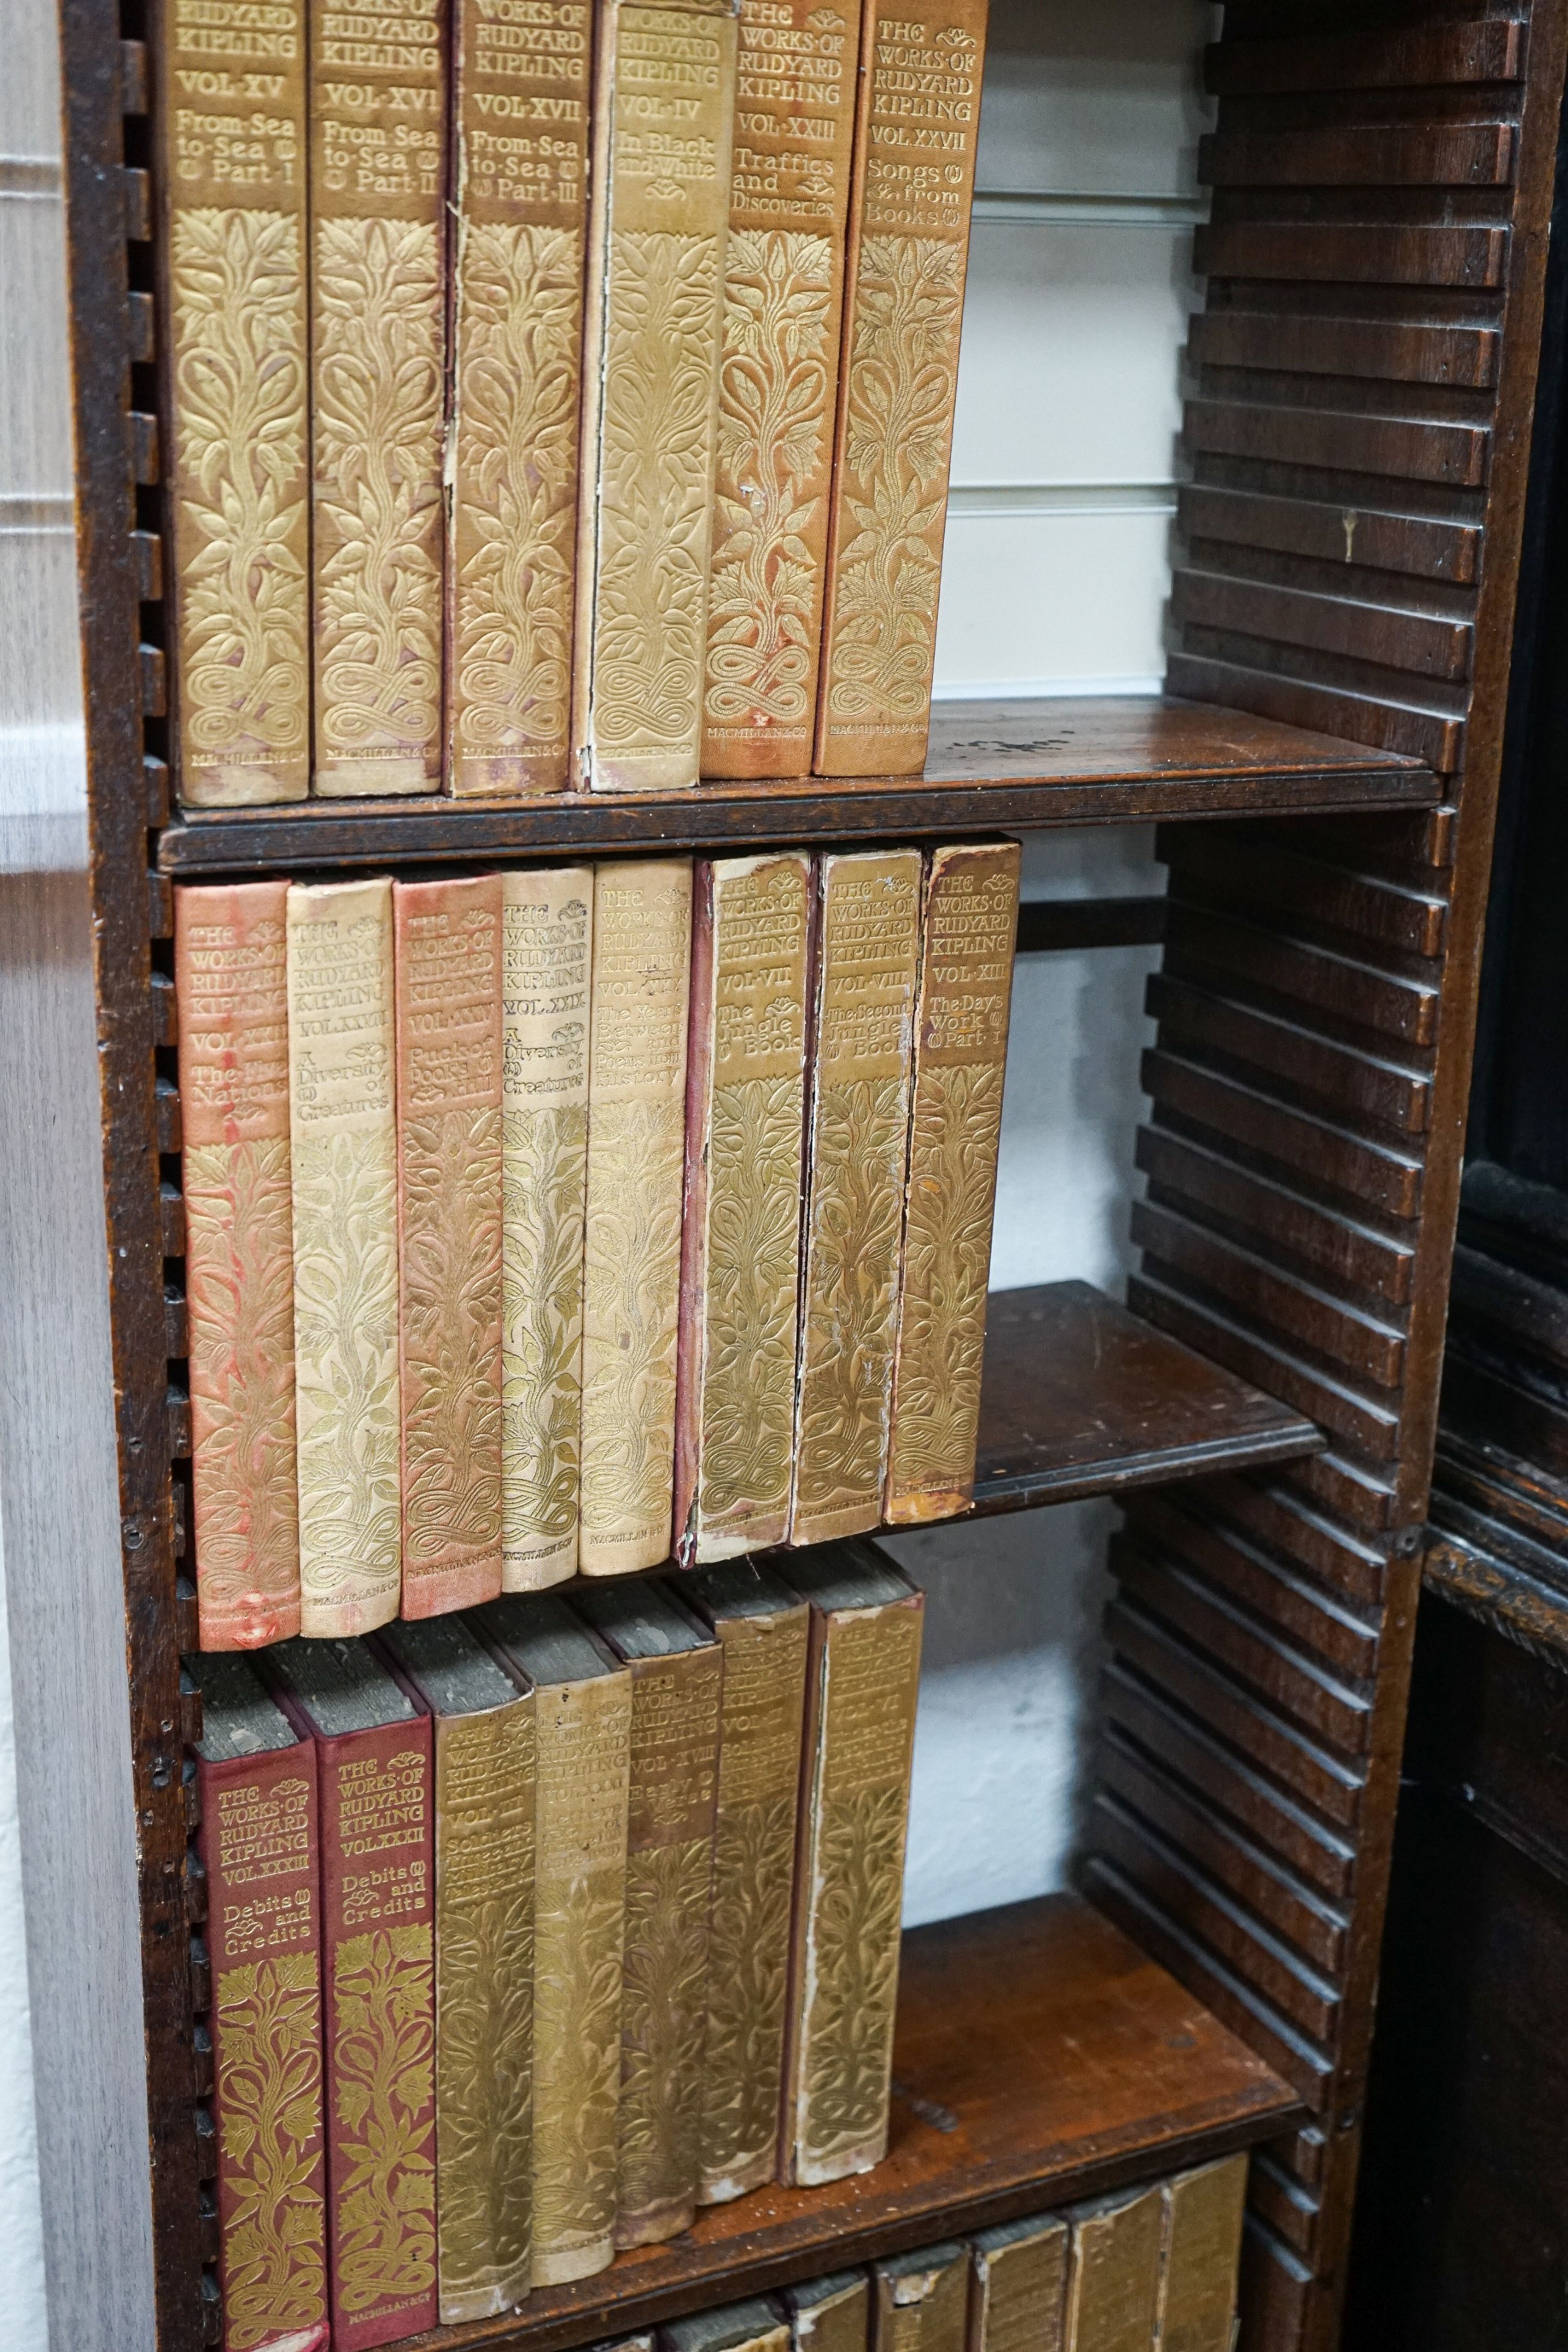 A Georgian mahogany wall-mounted narrow bookshelf, width 48cm, depth 18cm, height 147cm, containing a limited edition Works of Rudyard Kipling in 33 volumes, published 1900